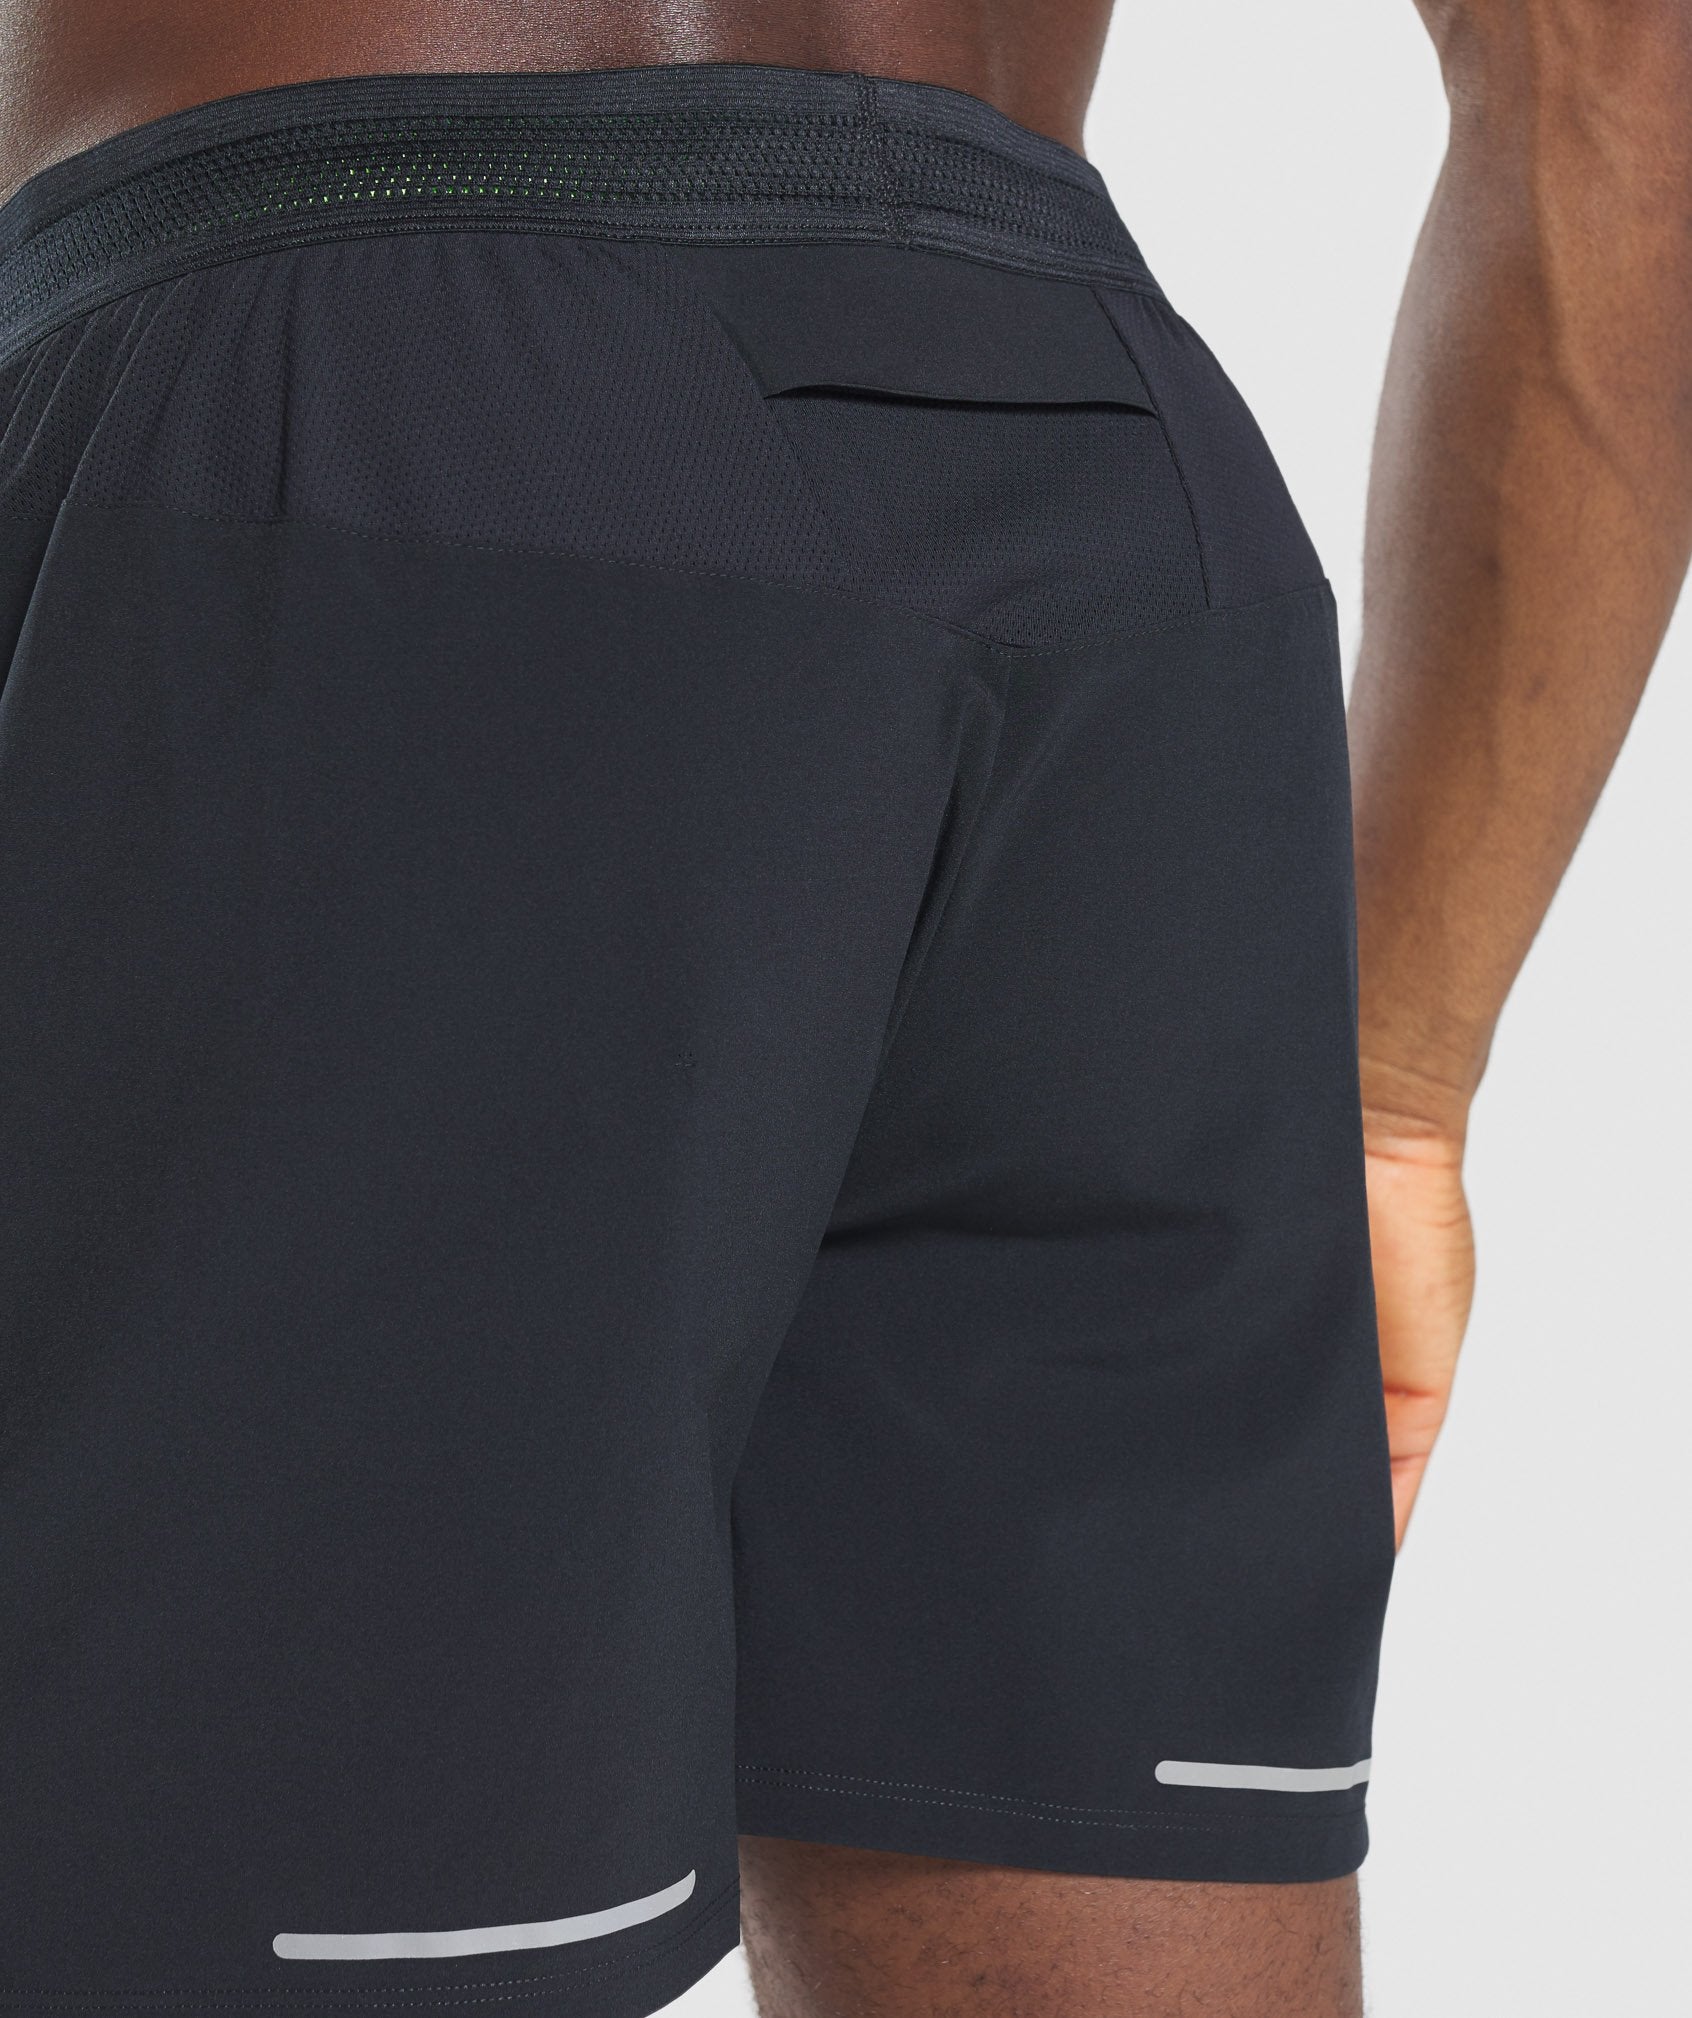 Speed 5" Shorts in Black - view 7